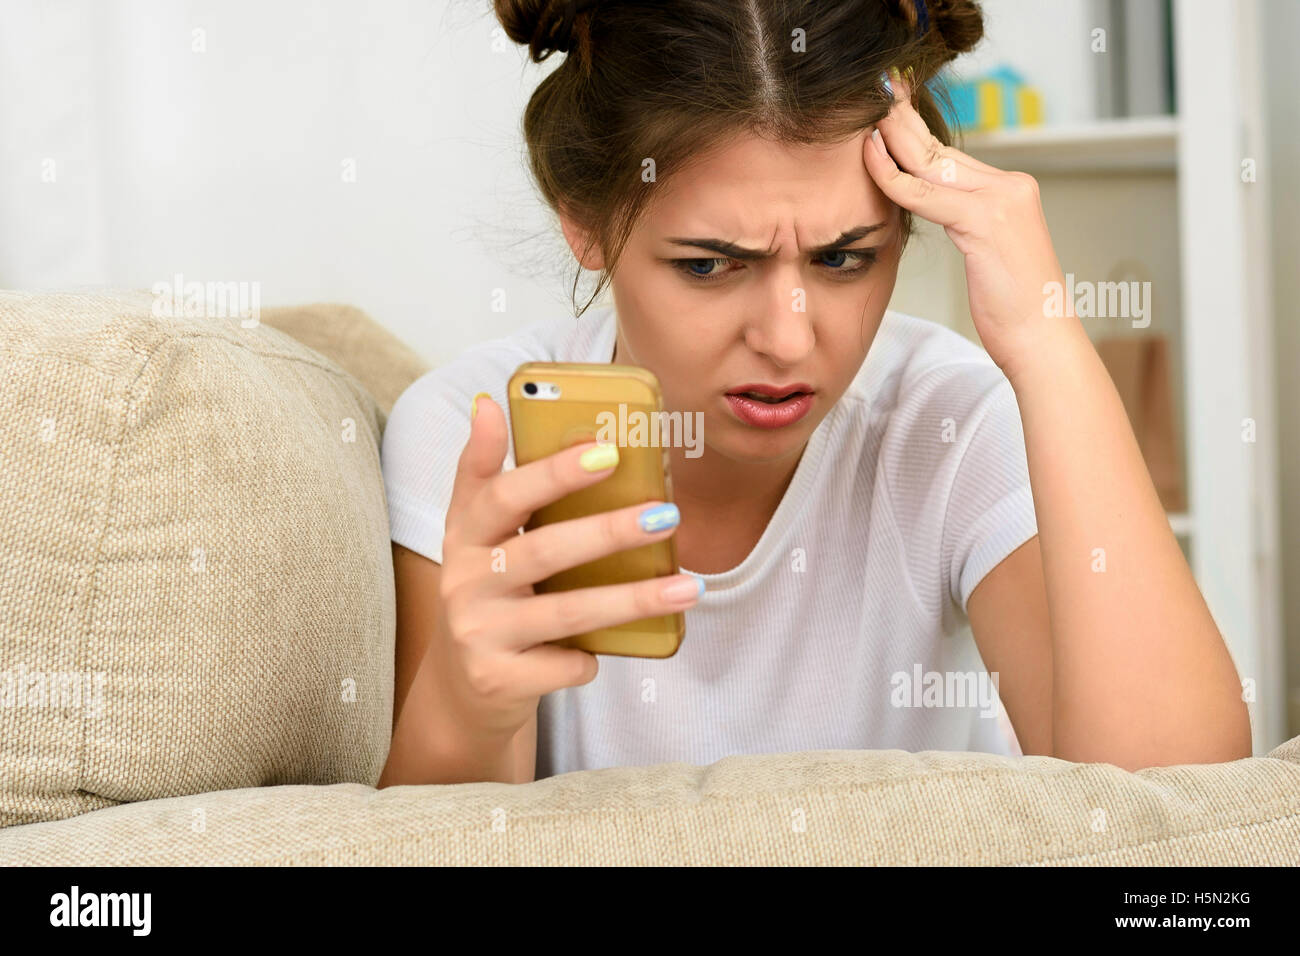 Happy girl using her smartphone on the couch at home Stock Photo